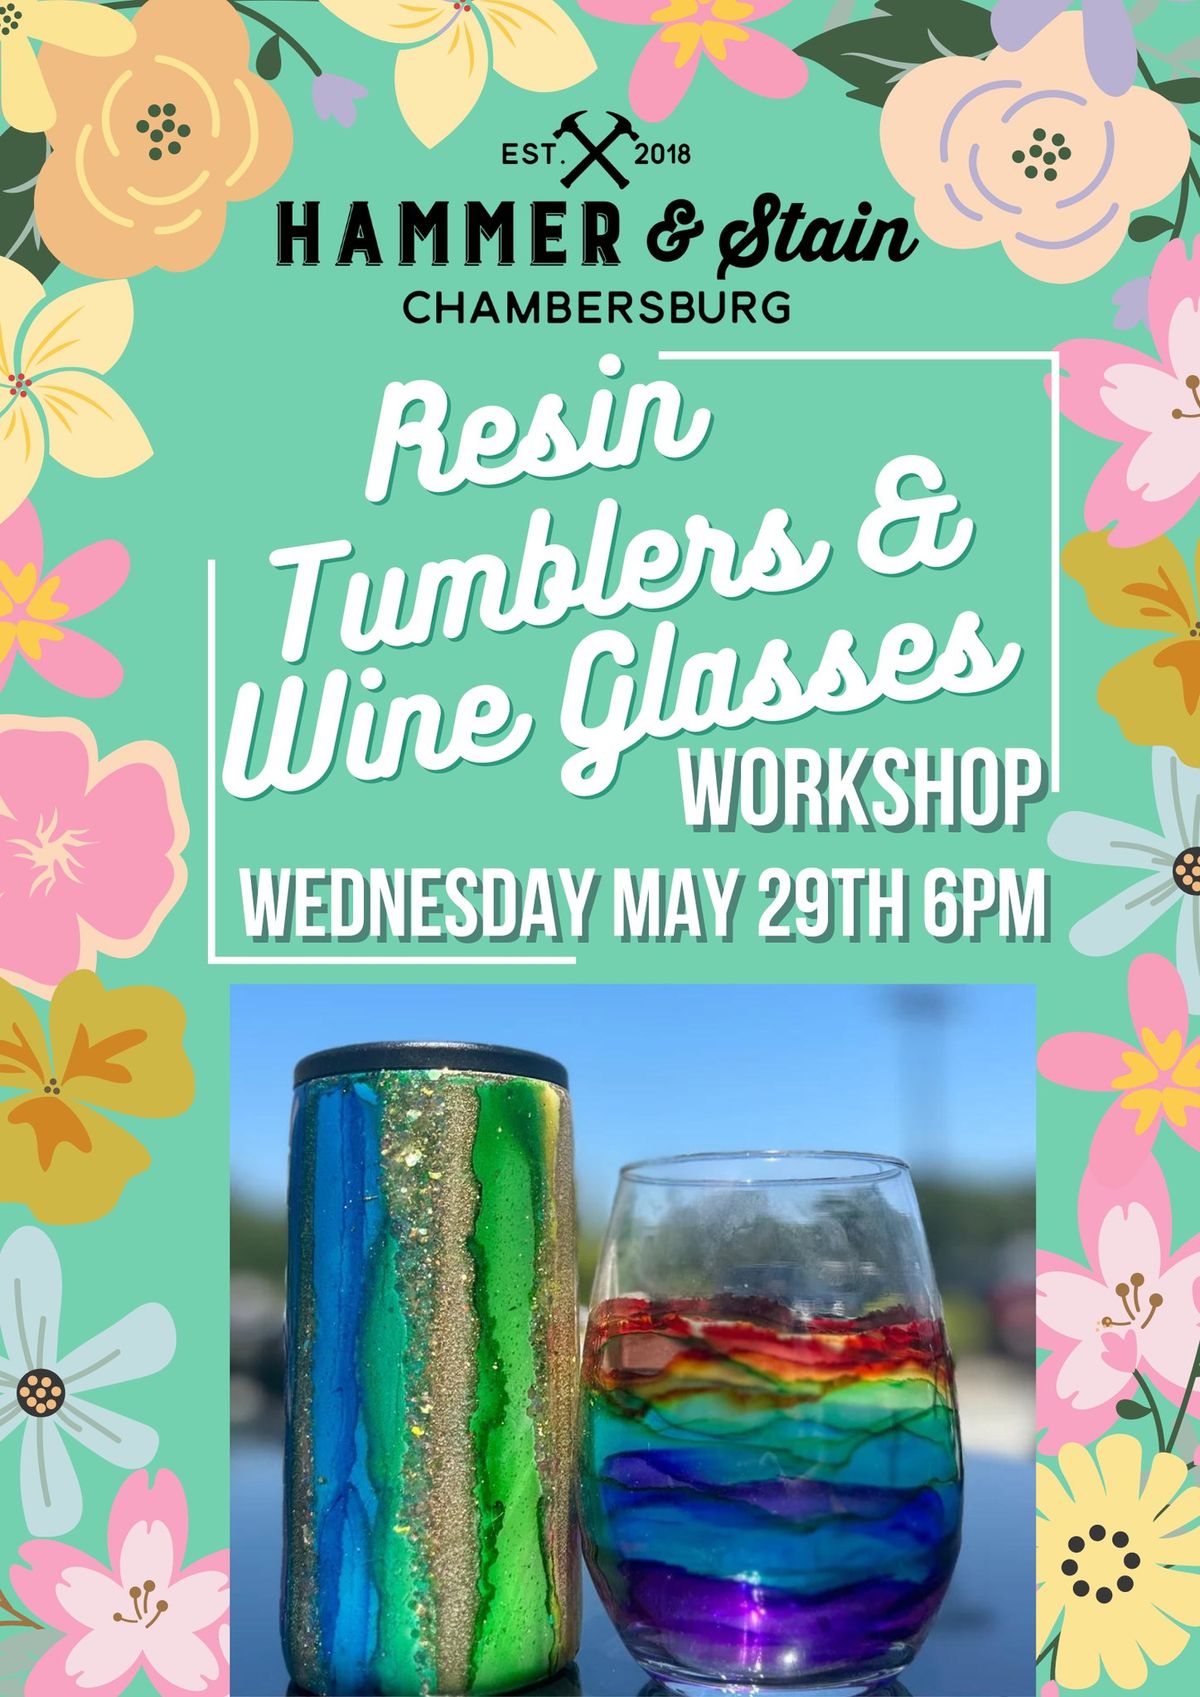 Wednesday May 29th- Resin Tumblers & Wine Glasses Workshop 6pm